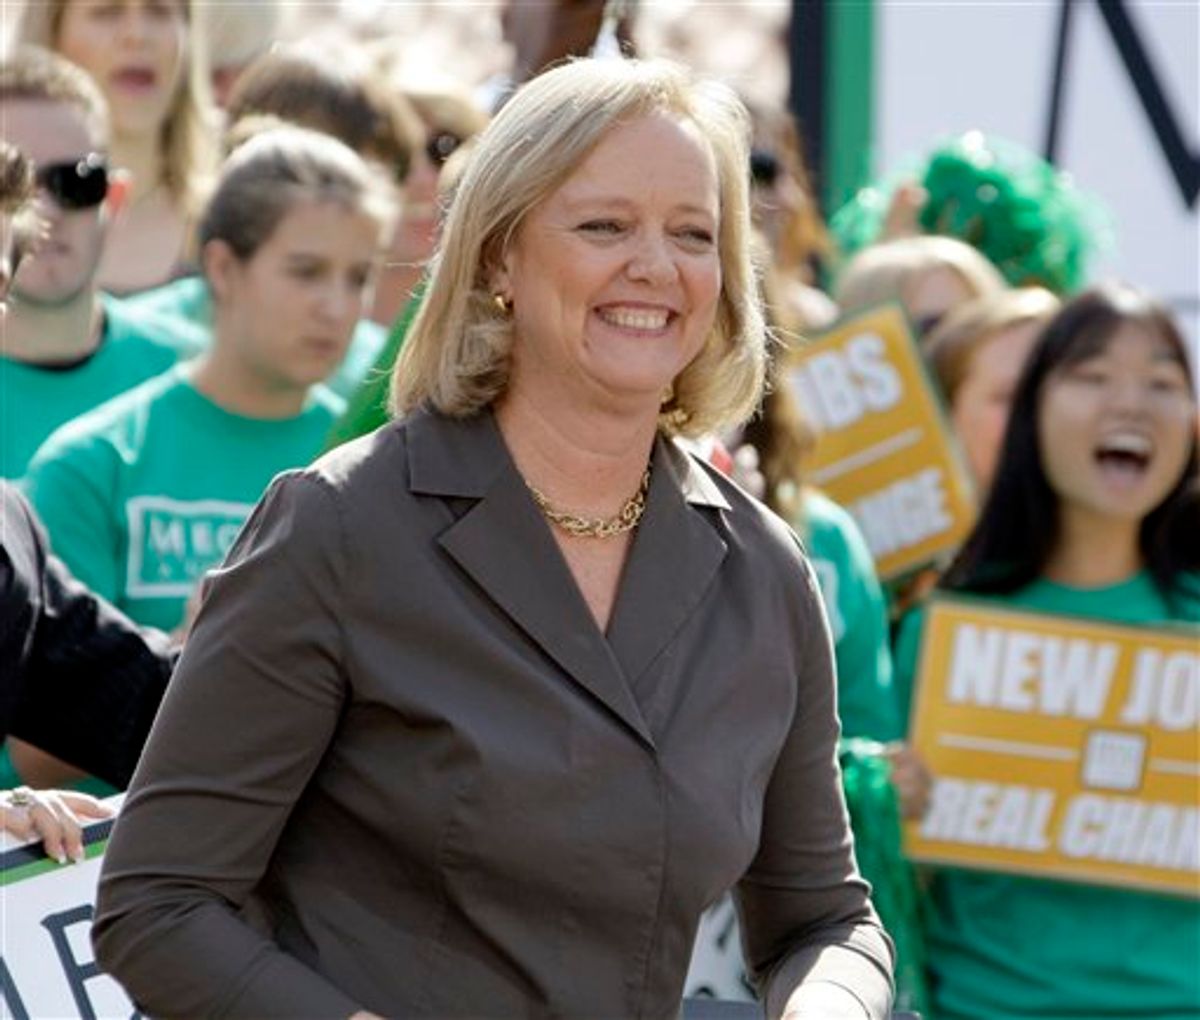 FILE - This Oct. 25, 2010 file photo shows California Republican gubernatorial candidate Meg Whitman at a campaign stop in Thousand Oaks, Calif. Whitman, conducting the most expensive campaign for governor in U.S. history _ nearly $172 million and counting _ is inundating California voters with an unprecedented array of TV and radio ads, glossy magazines, smartphone messages, Facebook videos, postcards and phone calls that will test how far a Republican dollar can go in a state Democrats call their own. (AP Photo/Reed Saxon, File) (AP)